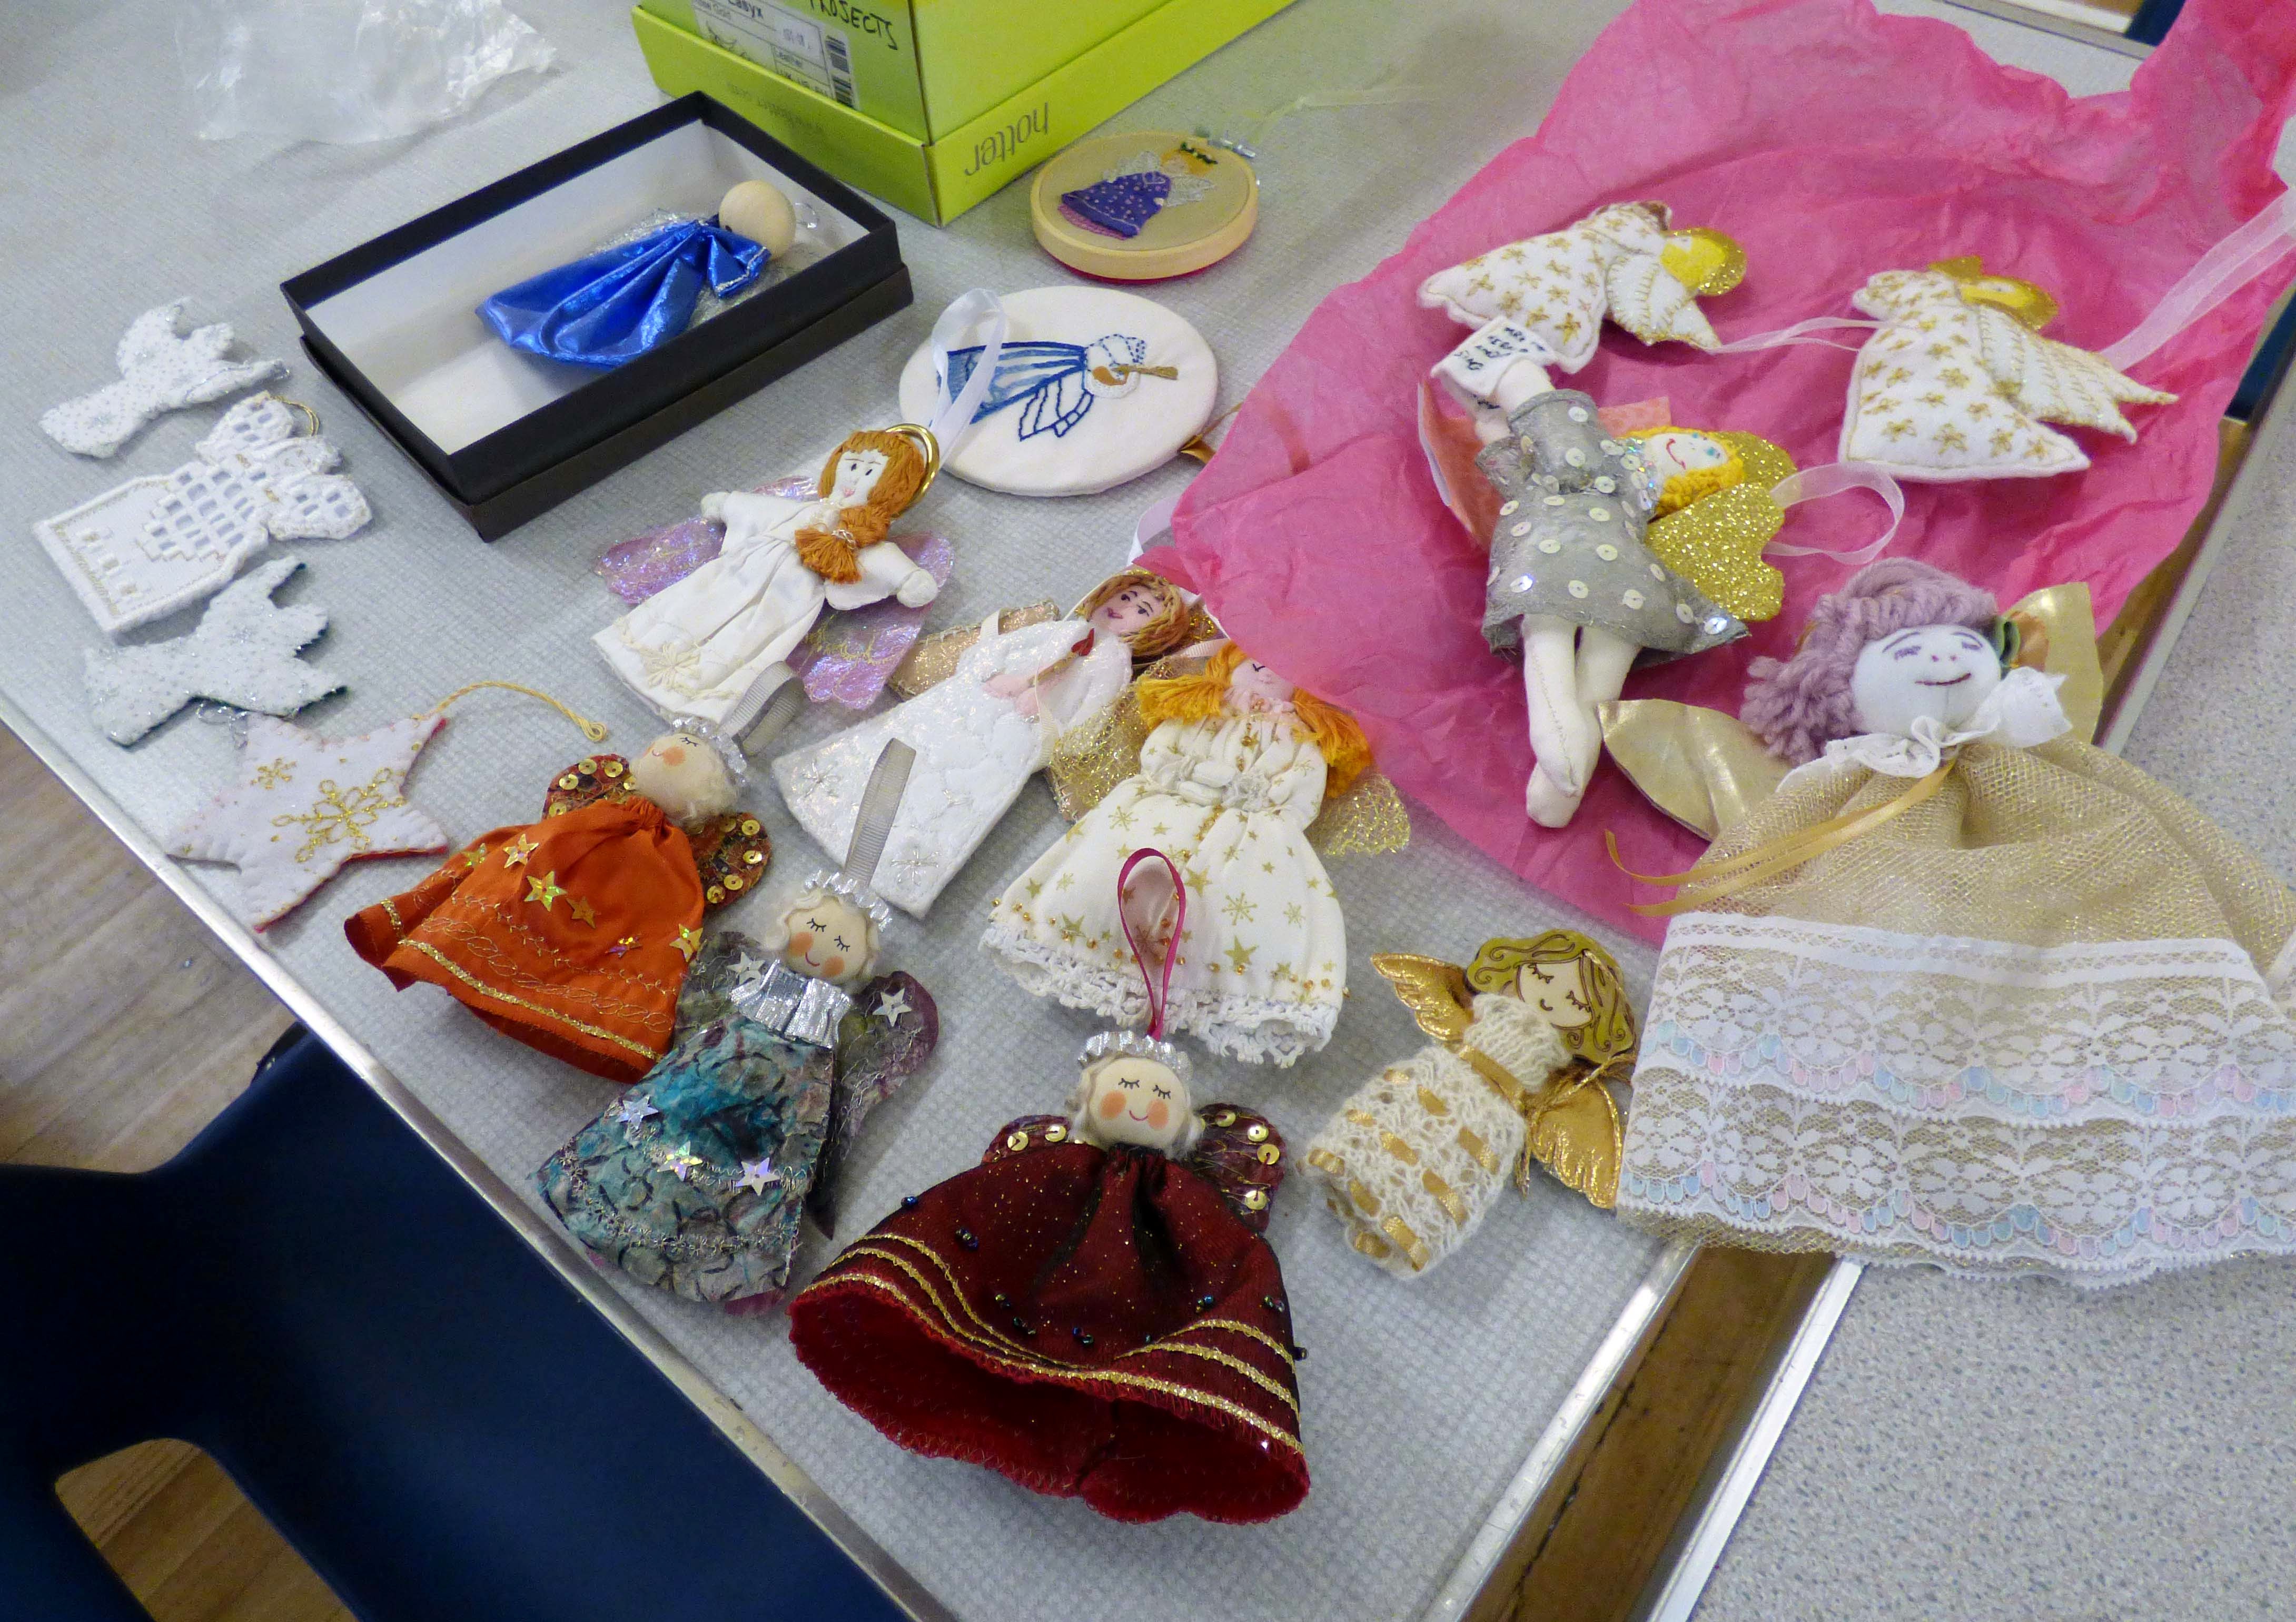 display of fabric angels made for All Hallows church Christmas display by MEsG members